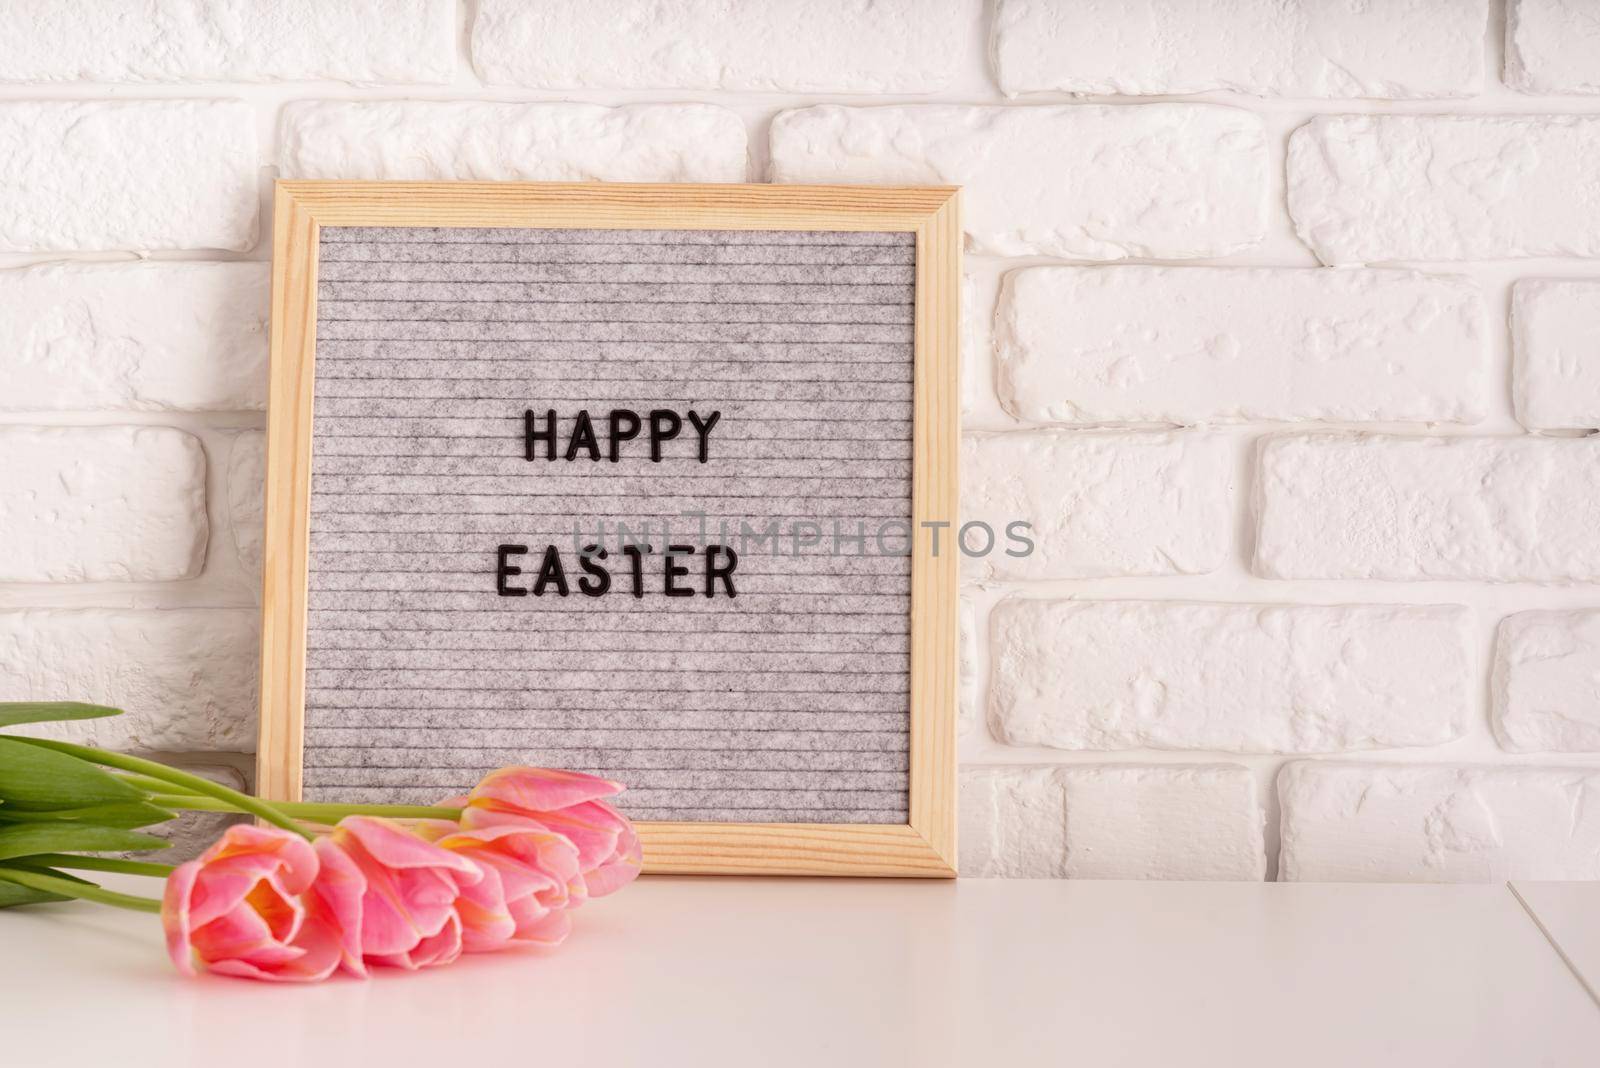 Easter hliday concept. Vase with tulips and gray felt letter board with words Happy Easter on white bricks background